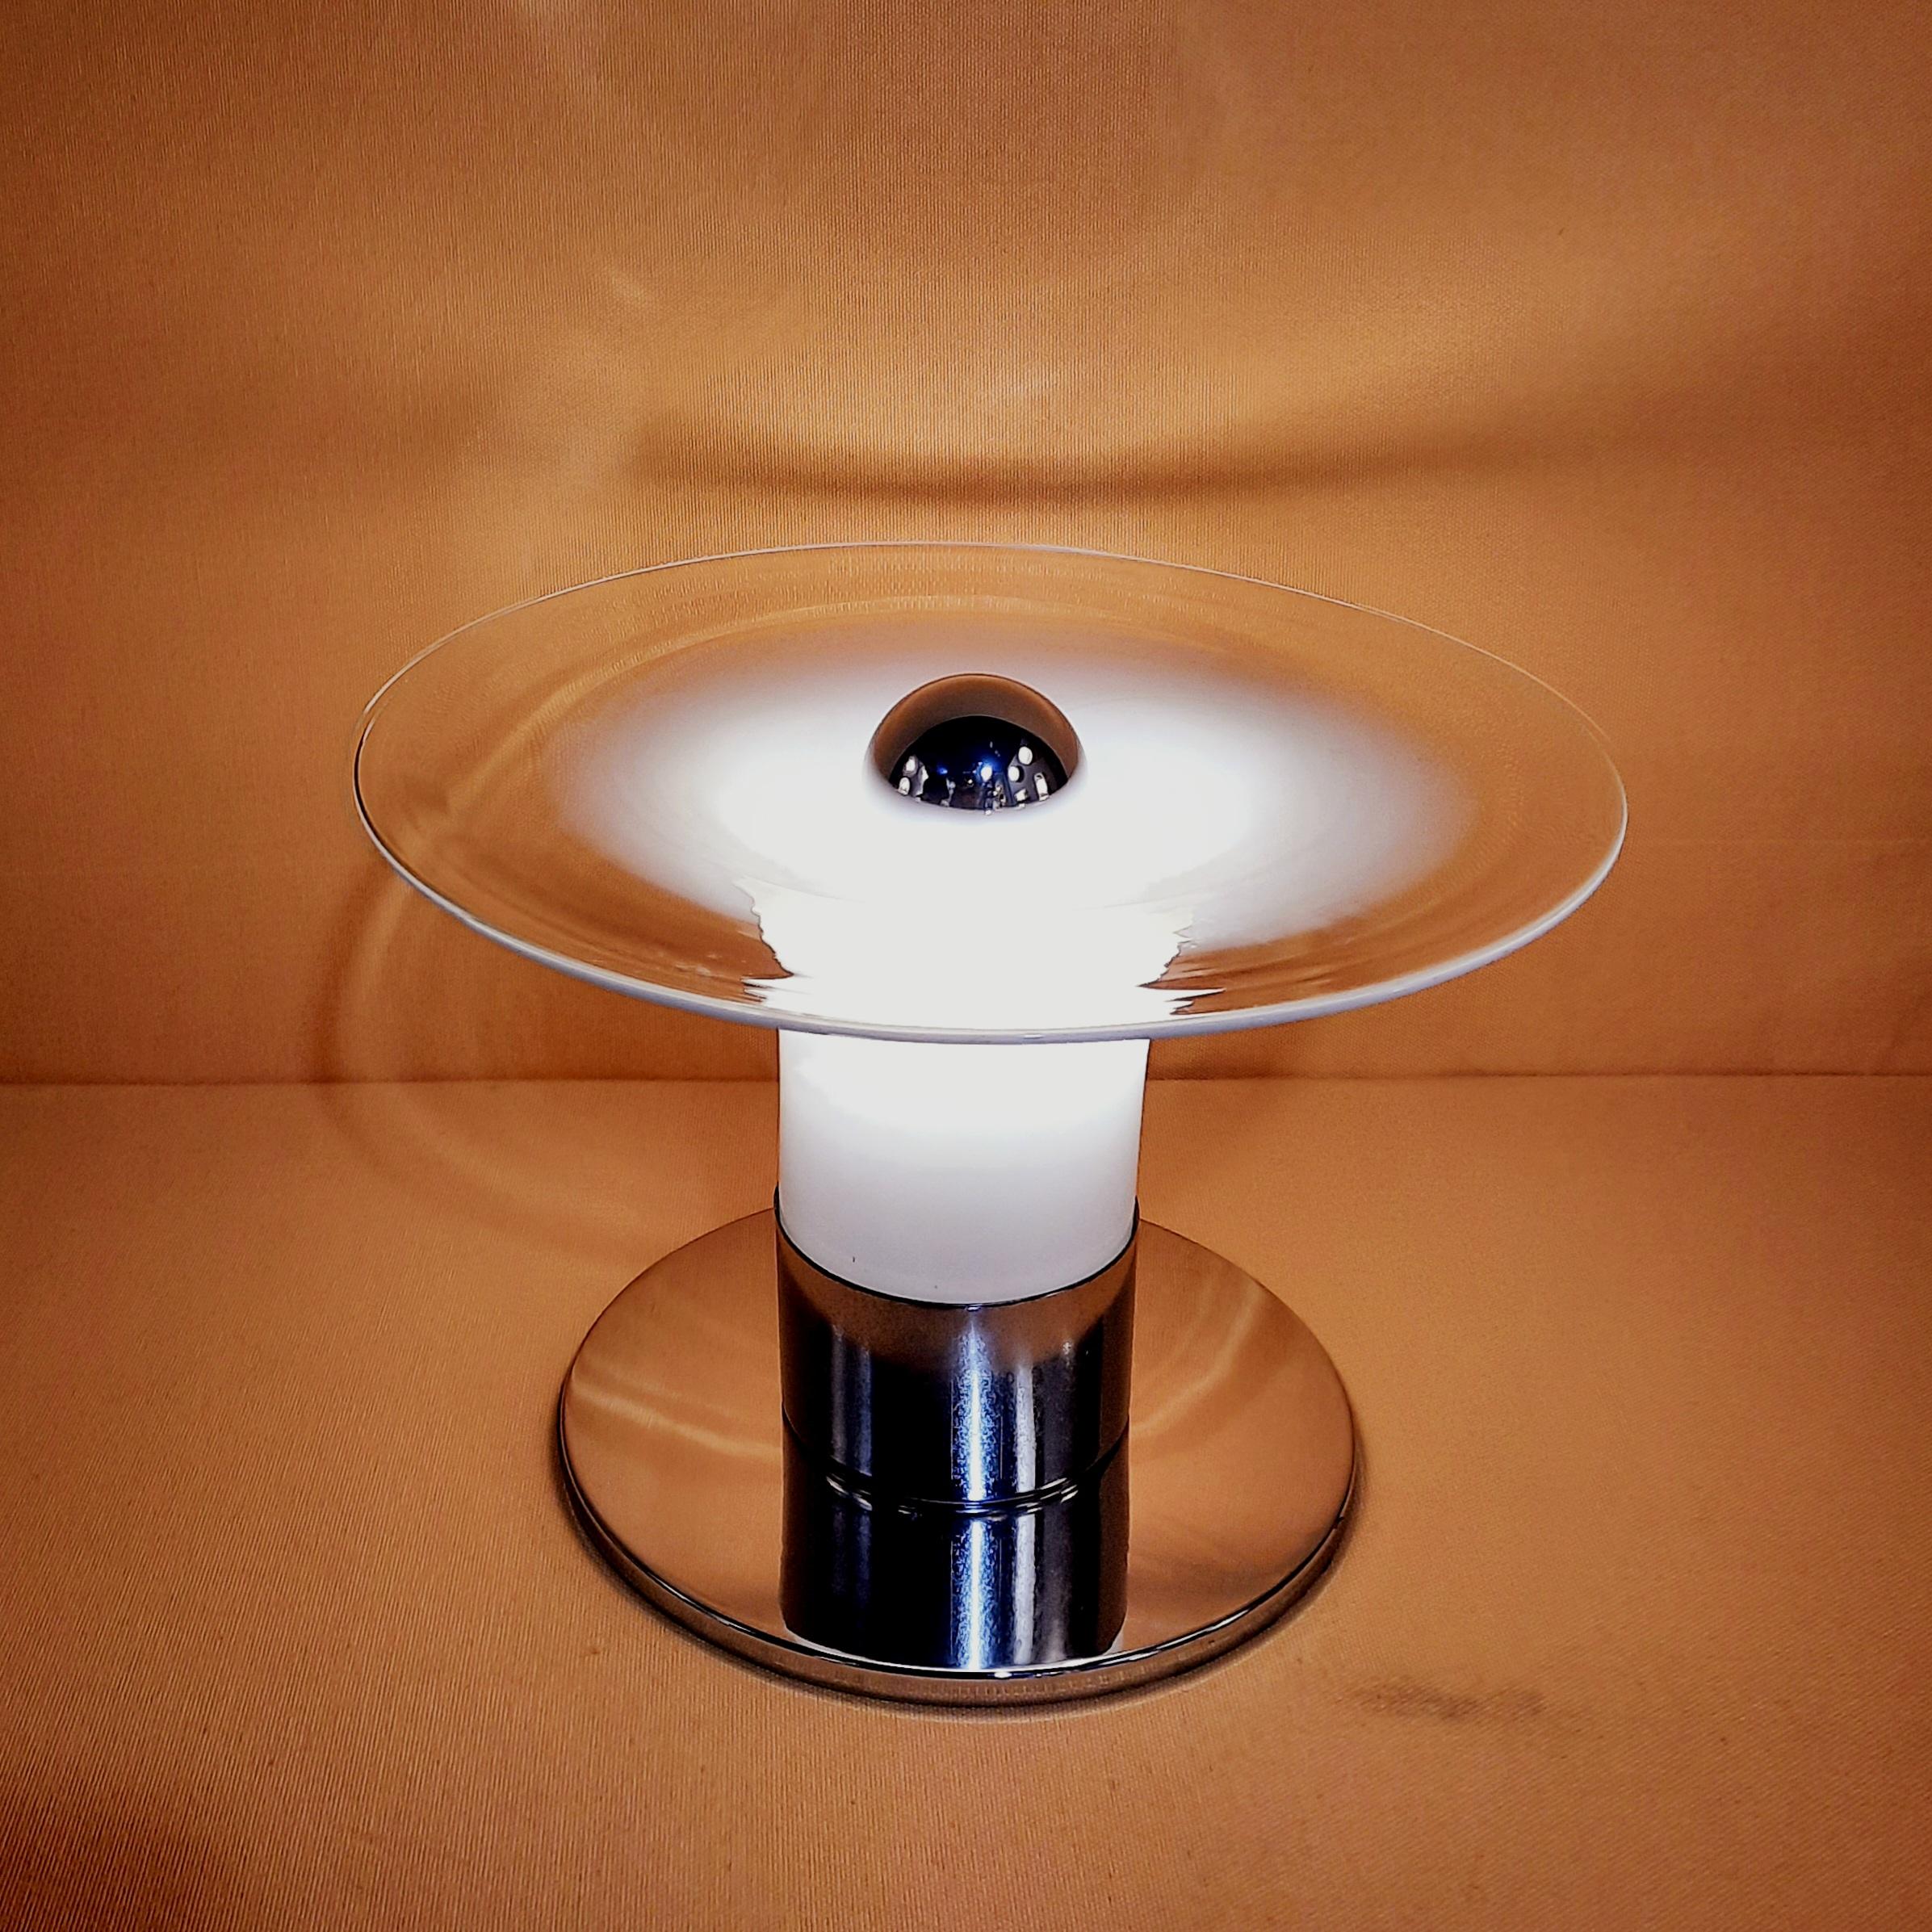 This table lamp is one of the declinaison of the 